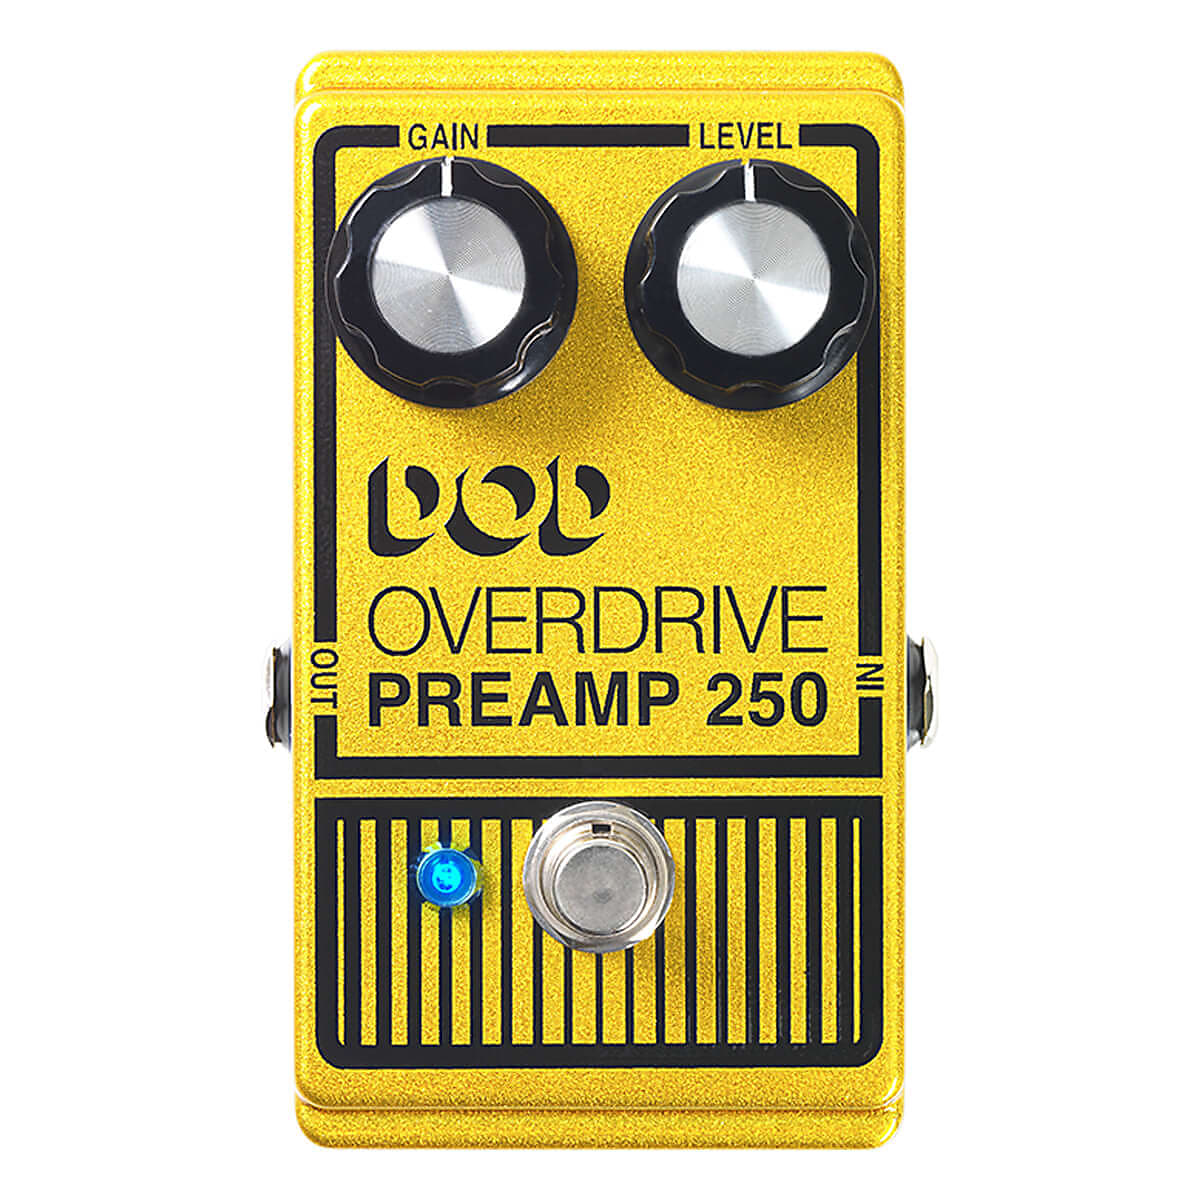 DOD Overdrive Preamp 250 Reissue | Reverb